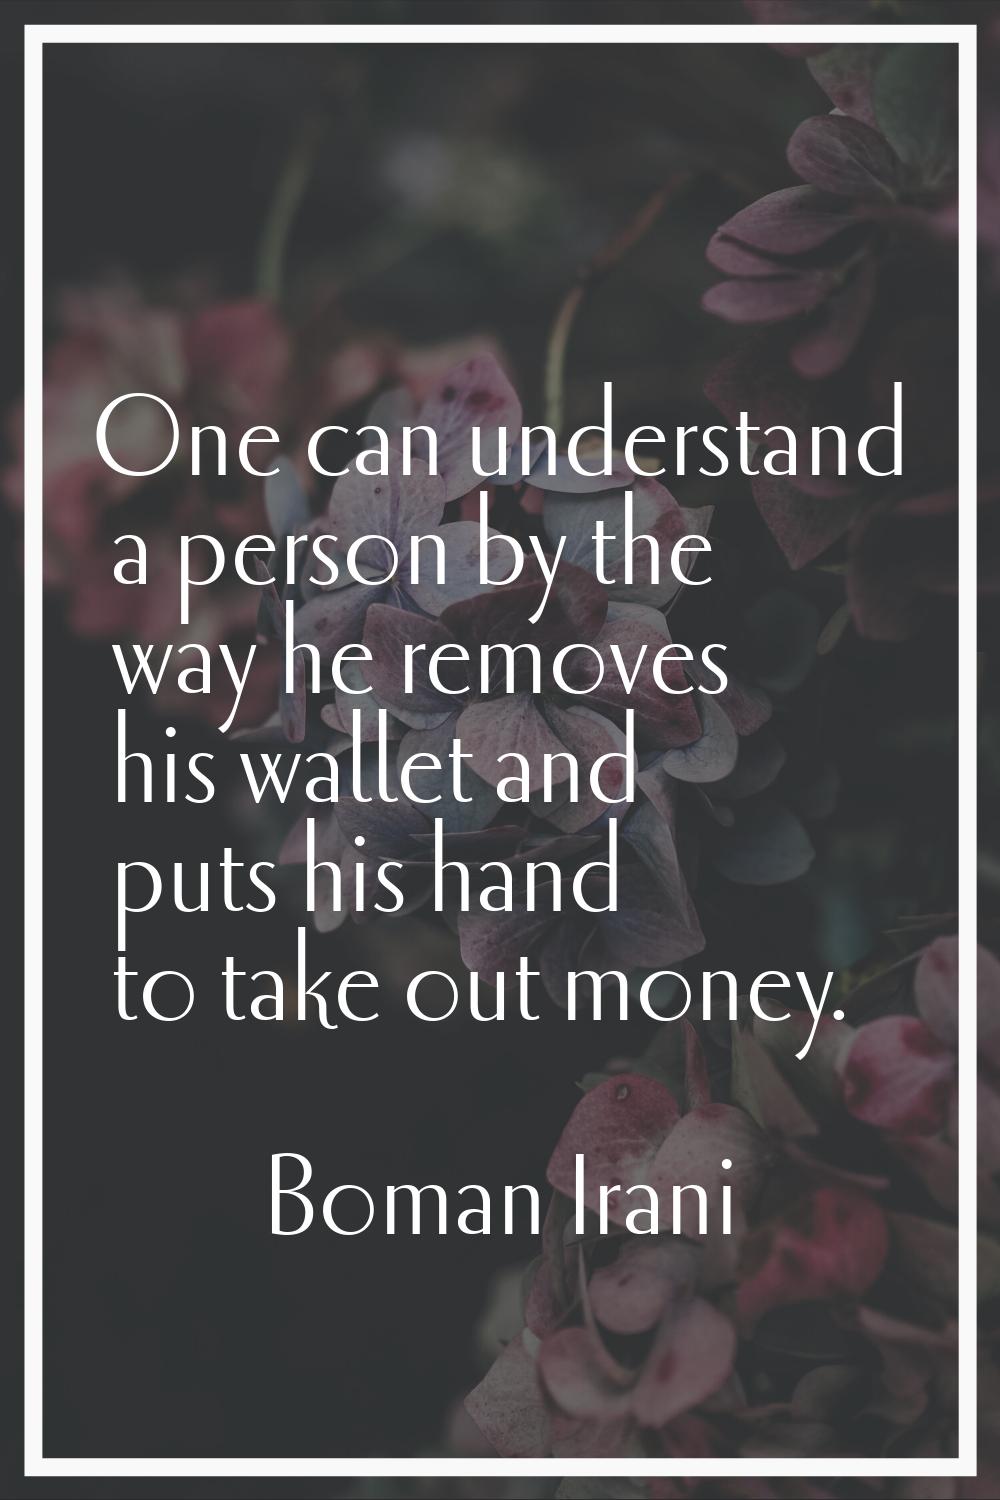 One can understand a person by the way he removes his wallet and puts his hand to take out money.